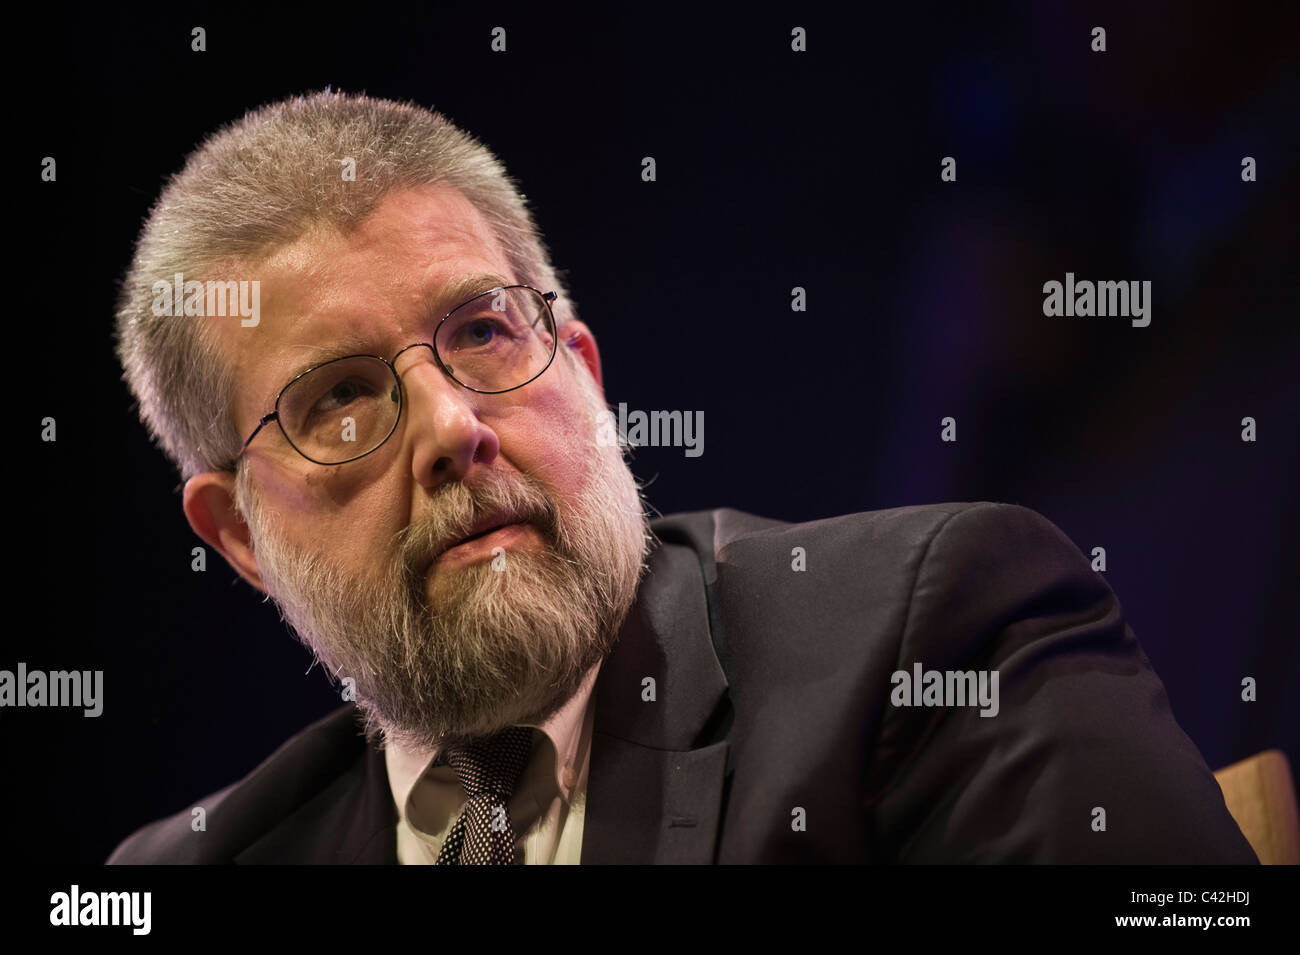 Michael Scheuer former head of CIA Bin Laden Unit pictured at Hay Festival 2011 Stock Photo